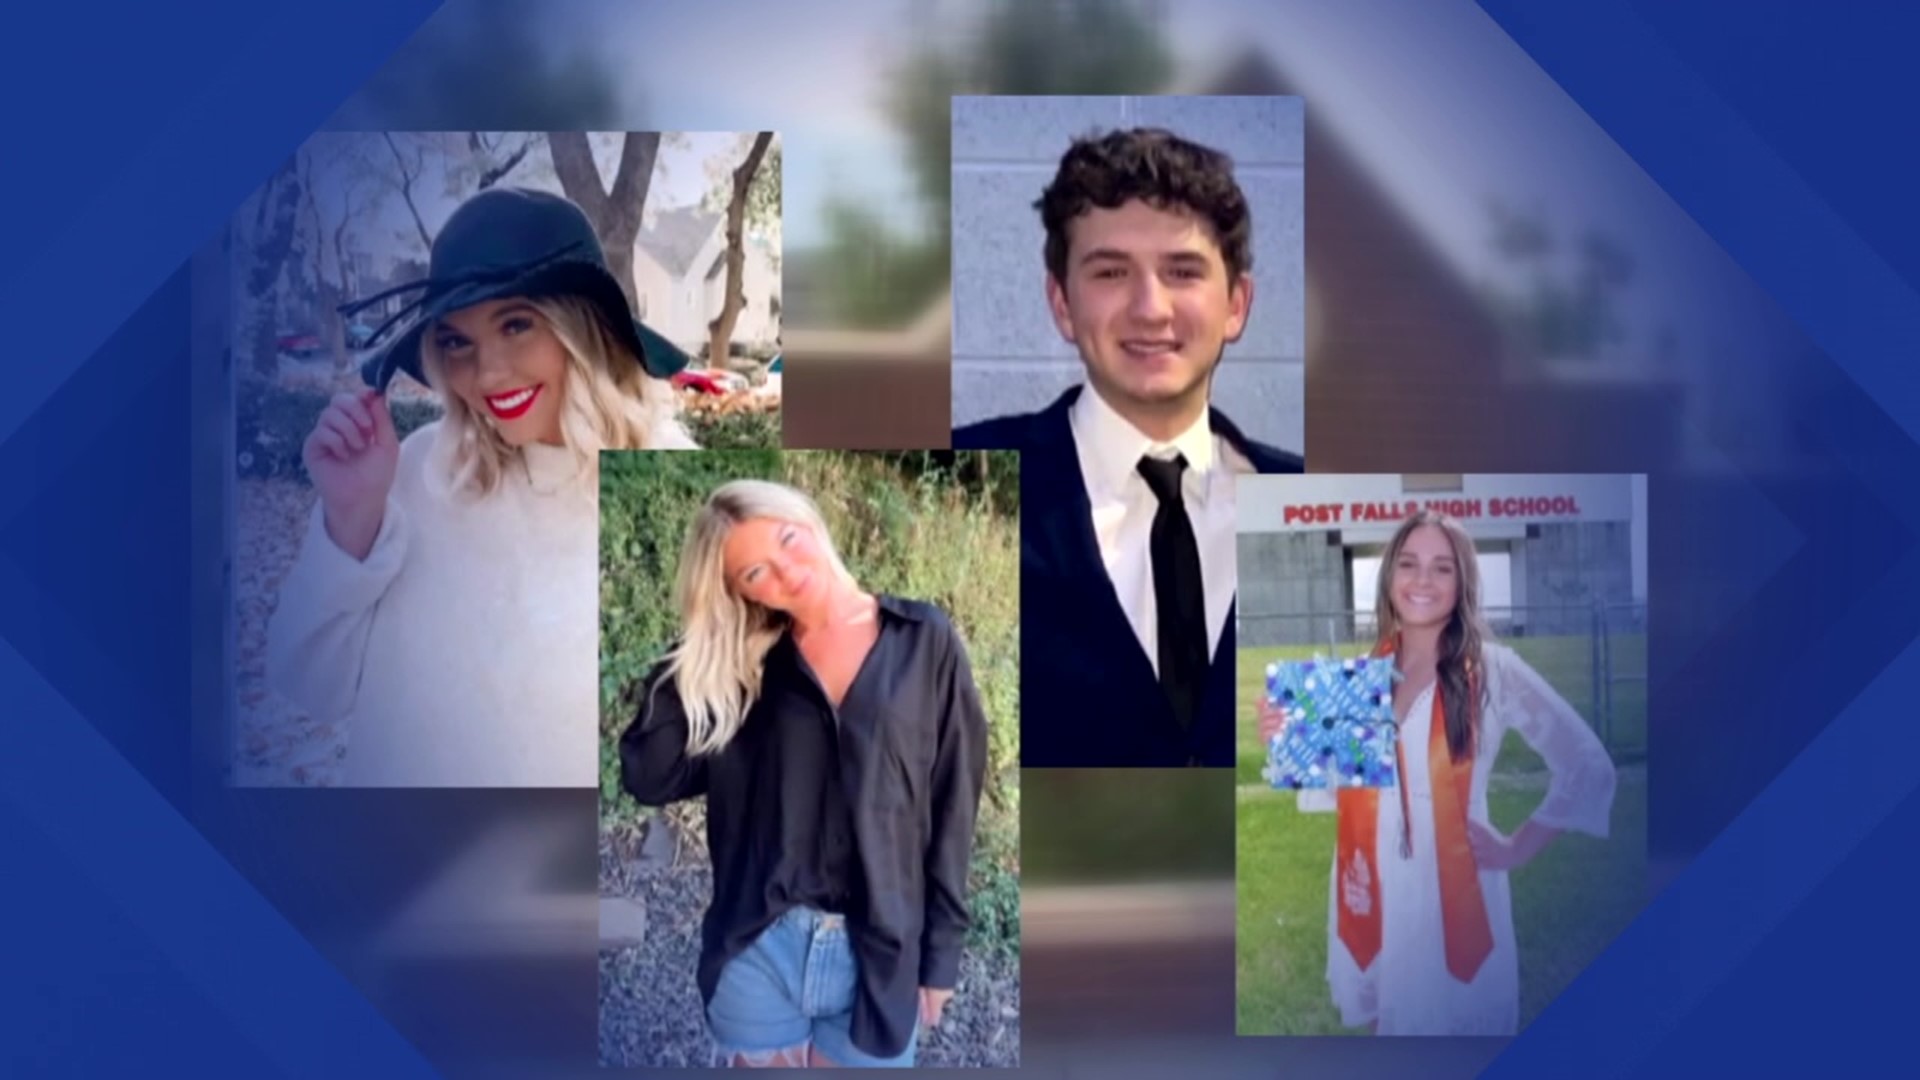 It's been one year since four students were brutally murdered at the University of Idaho. Monroe County native Bryan Kohberger stands accused of the slayings.